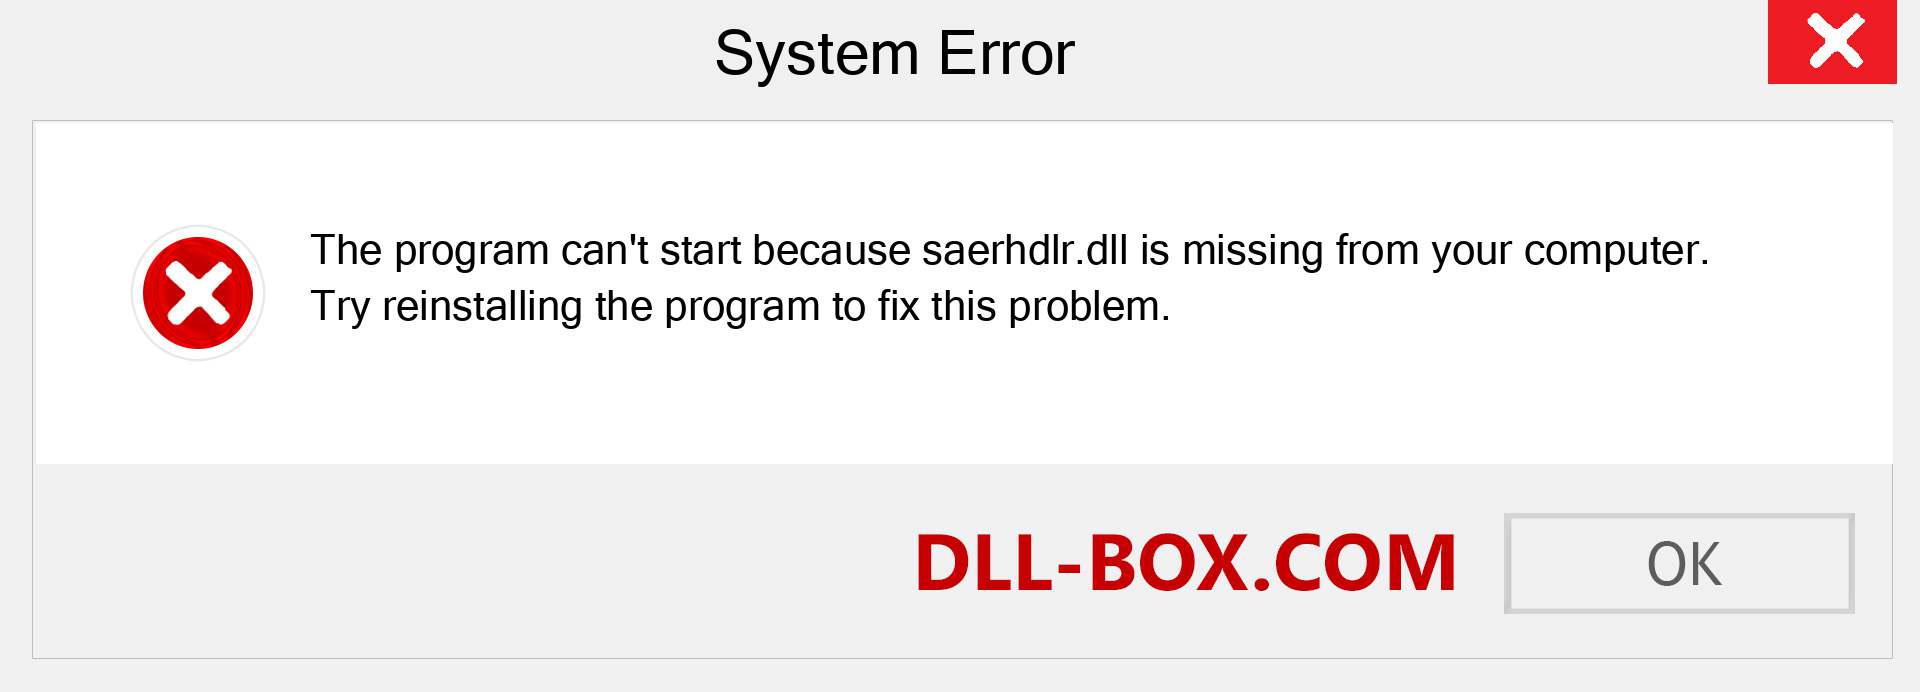  saerhdlr.dll file is missing?. Download for Windows 7, 8, 10 - Fix  saerhdlr dll Missing Error on Windows, photos, images